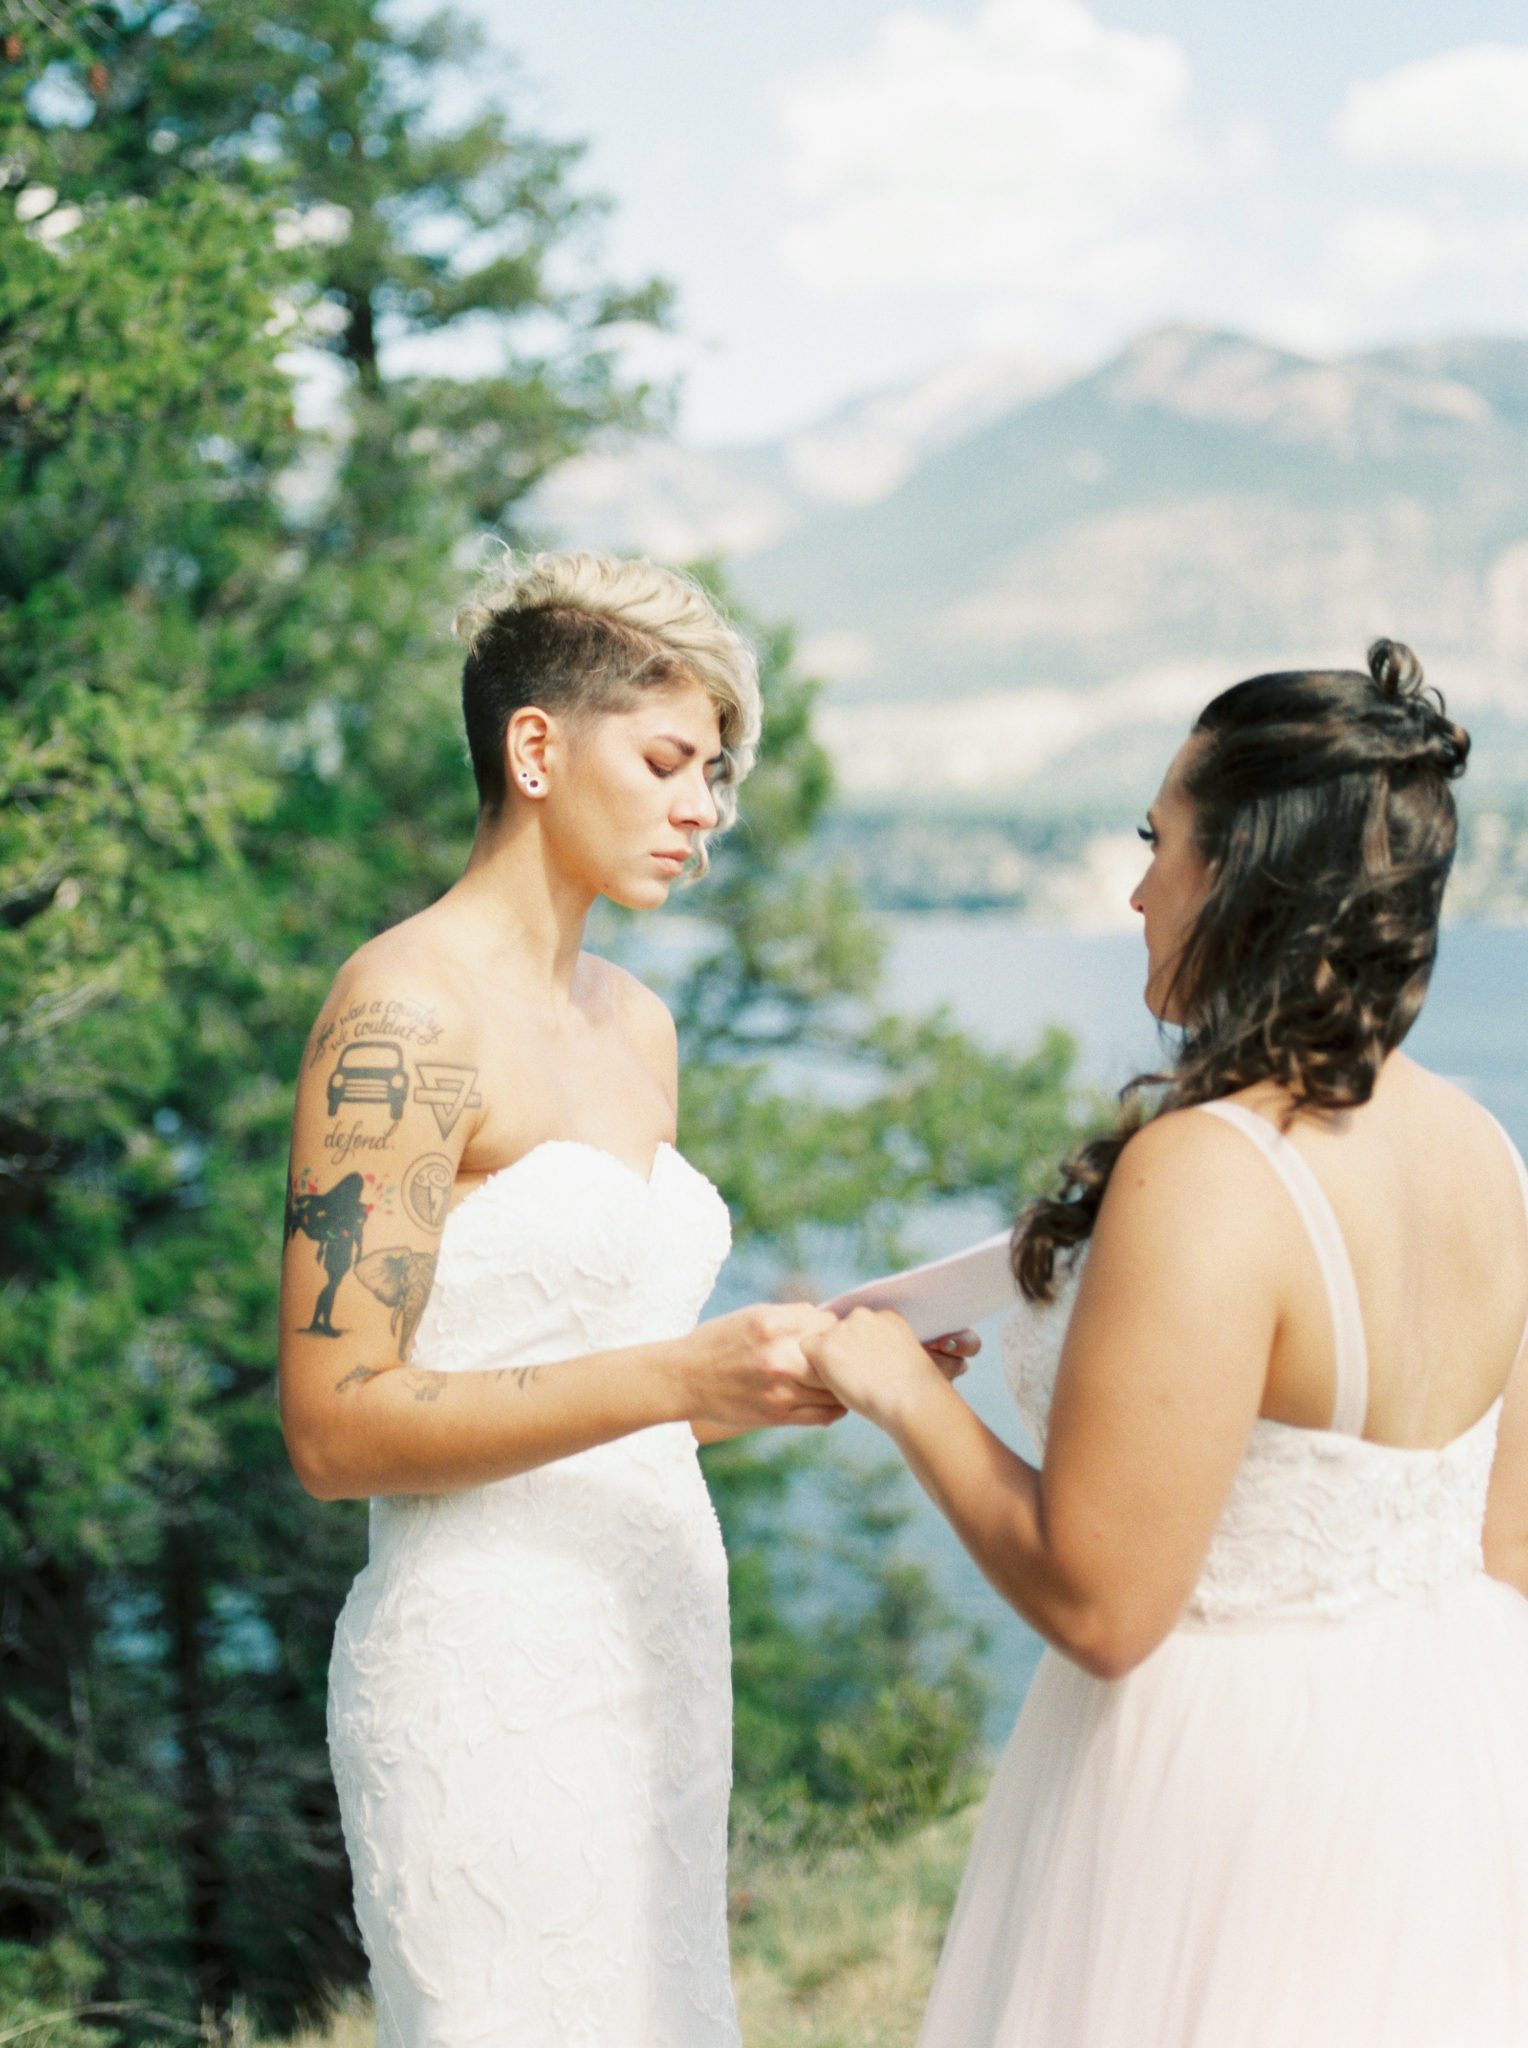 Handwritten wedding vows exchanged lakeside at an Invermere wedding ceremony